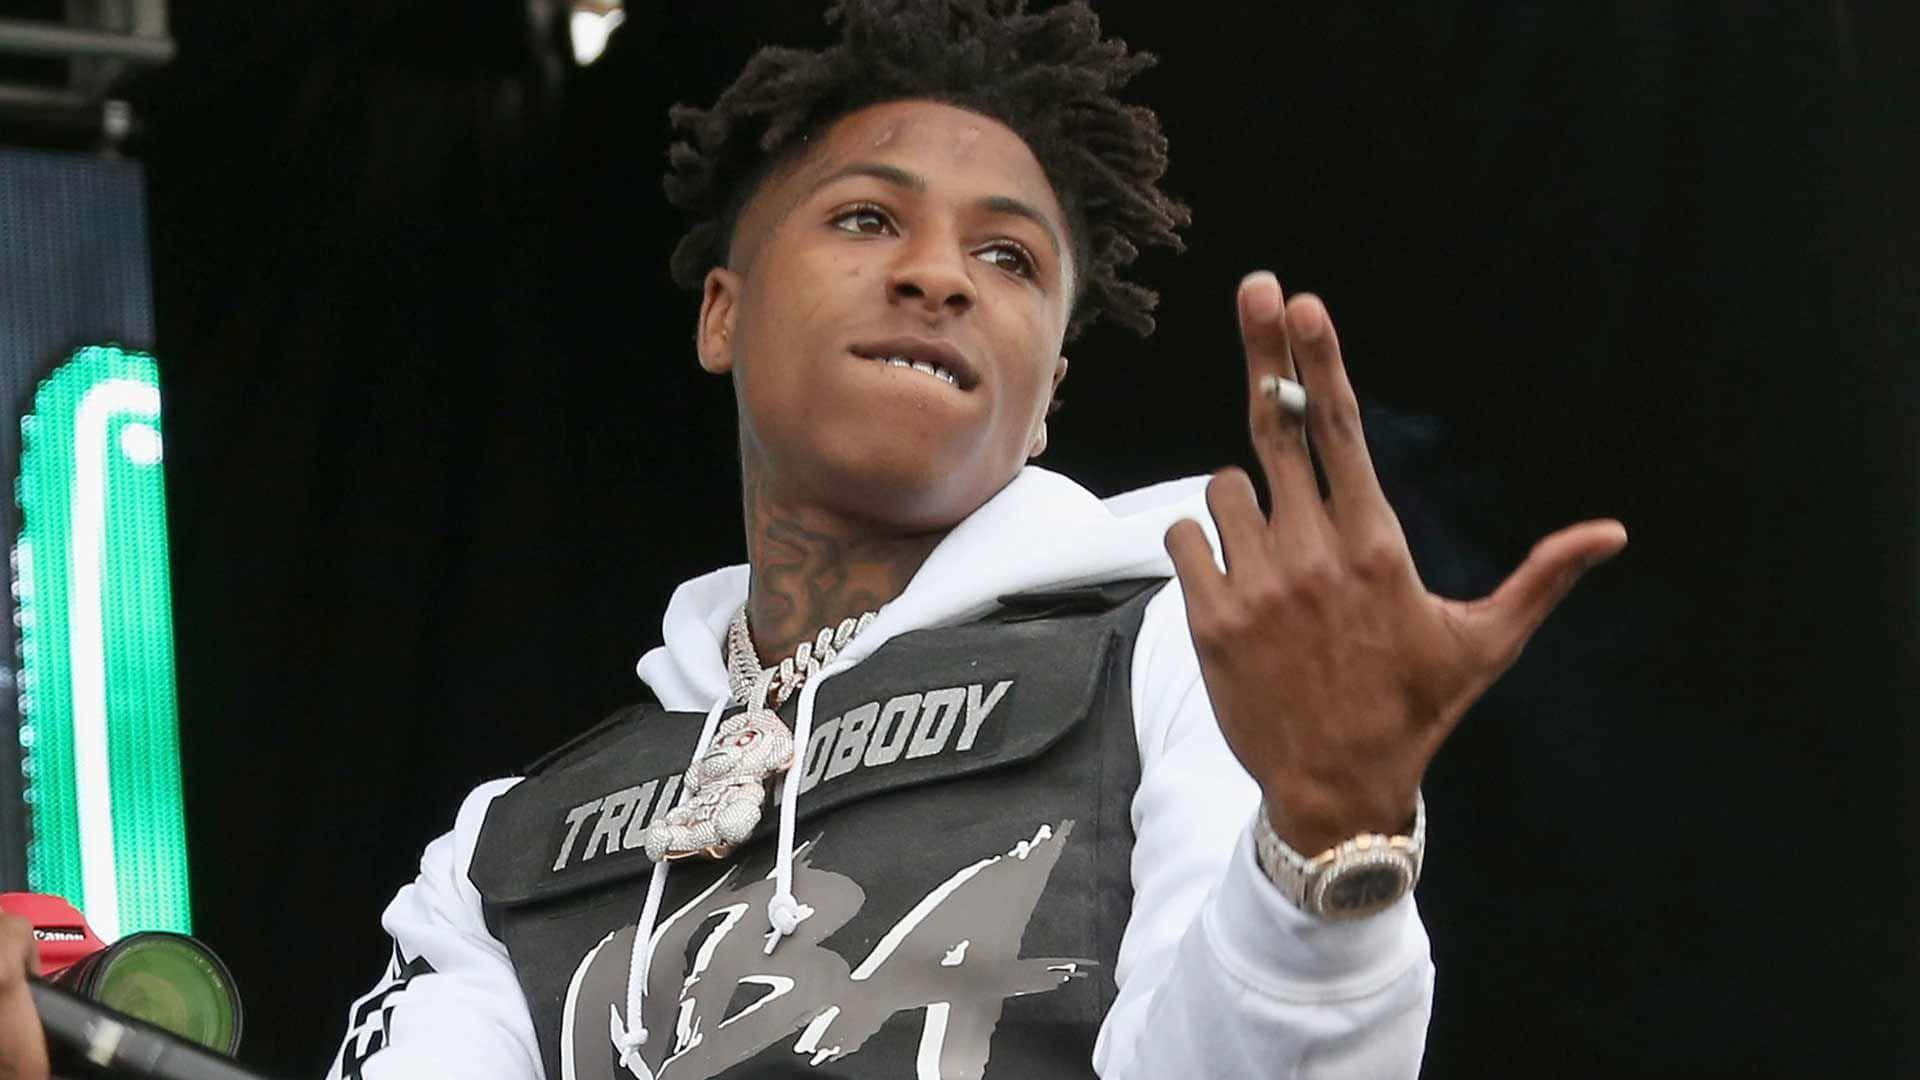 Download NBA Youngboy at a Performance | Wallpapers.com